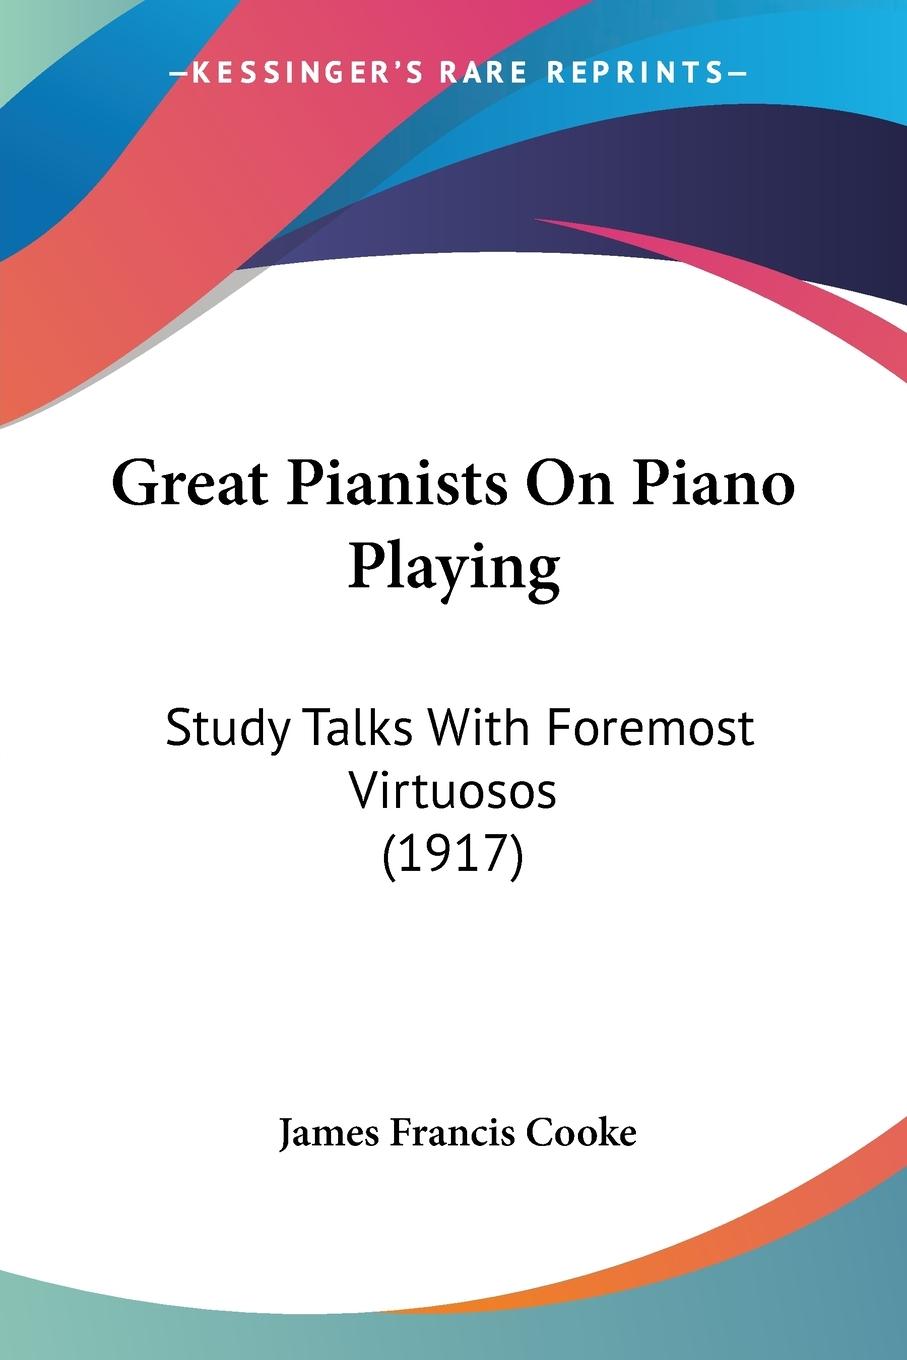 Great Pianists On Piano Playing - Cooke, James Francis